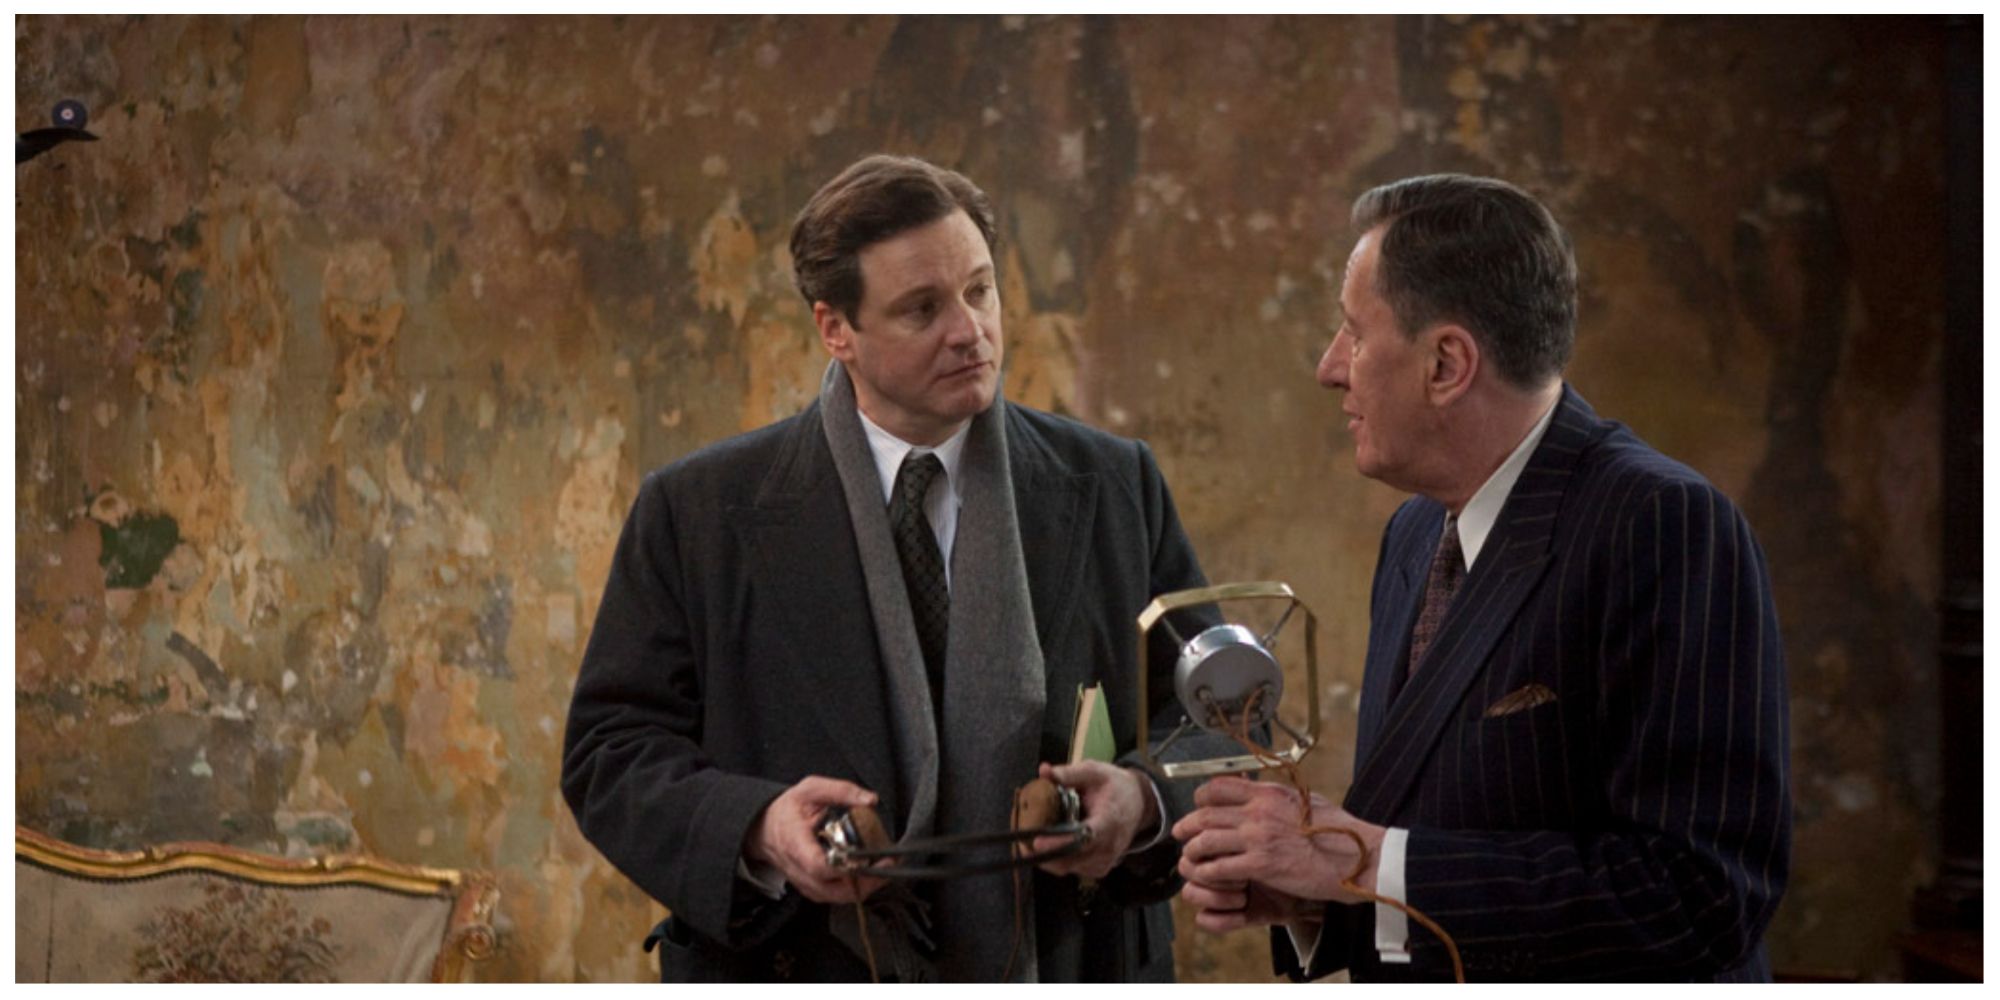 Colin Firth (left) and Geoffrey Rush as King George VI and Lionel Logue respectively, in The King's Speech.